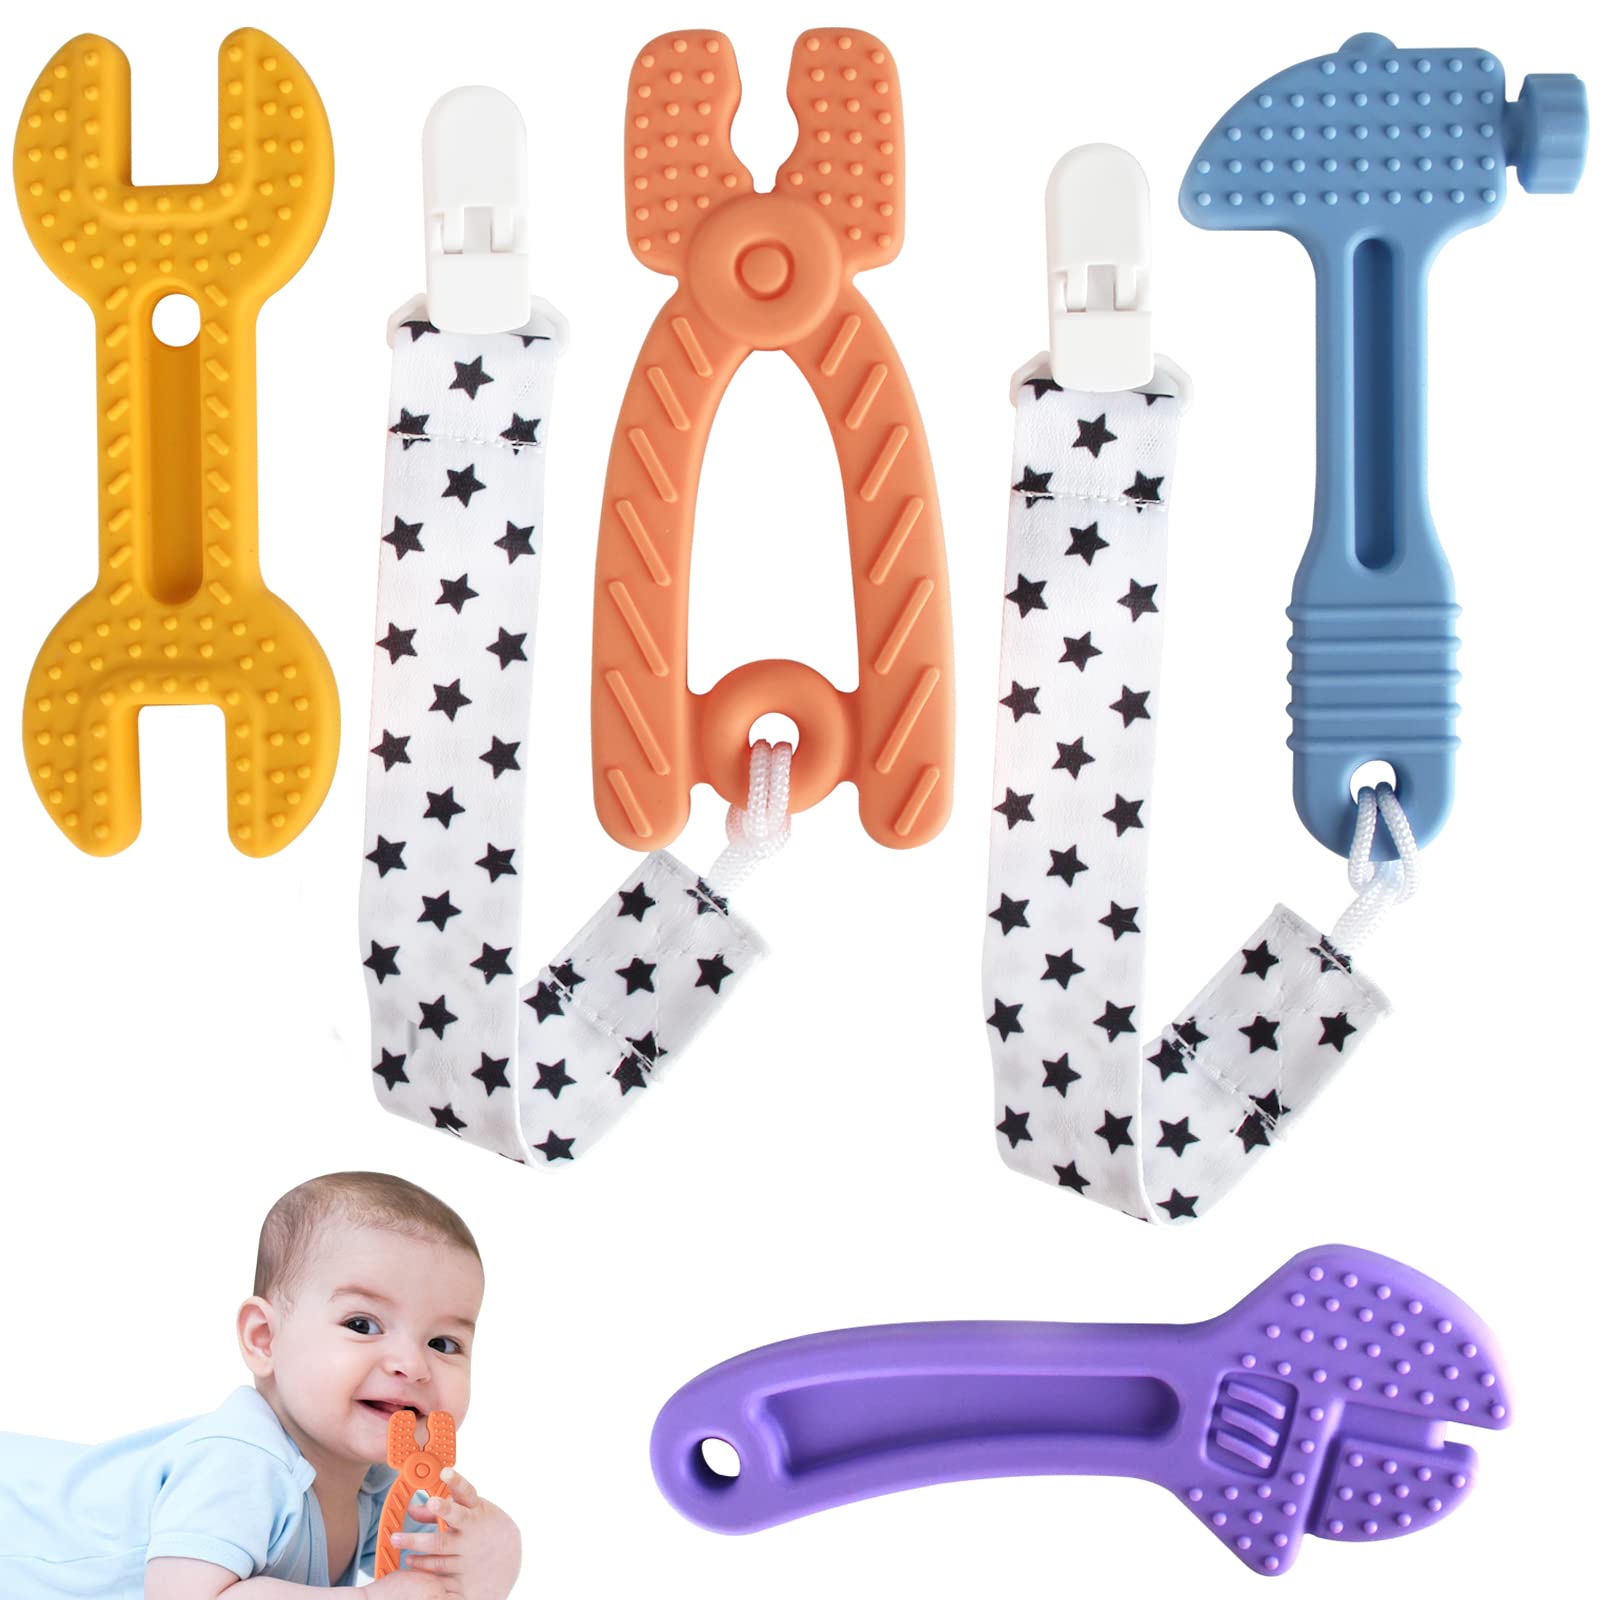 WUJUN 4 Pack Baby Teething Toys Soft Silicone Freezer BPA-Free , Hammer Wrench Spanner Pliers Saw Knife Tools Shape Soothe Babies Sore Molar for 3-12 Months Babies Gums Toys Set(Hammer Set 4 Packs)